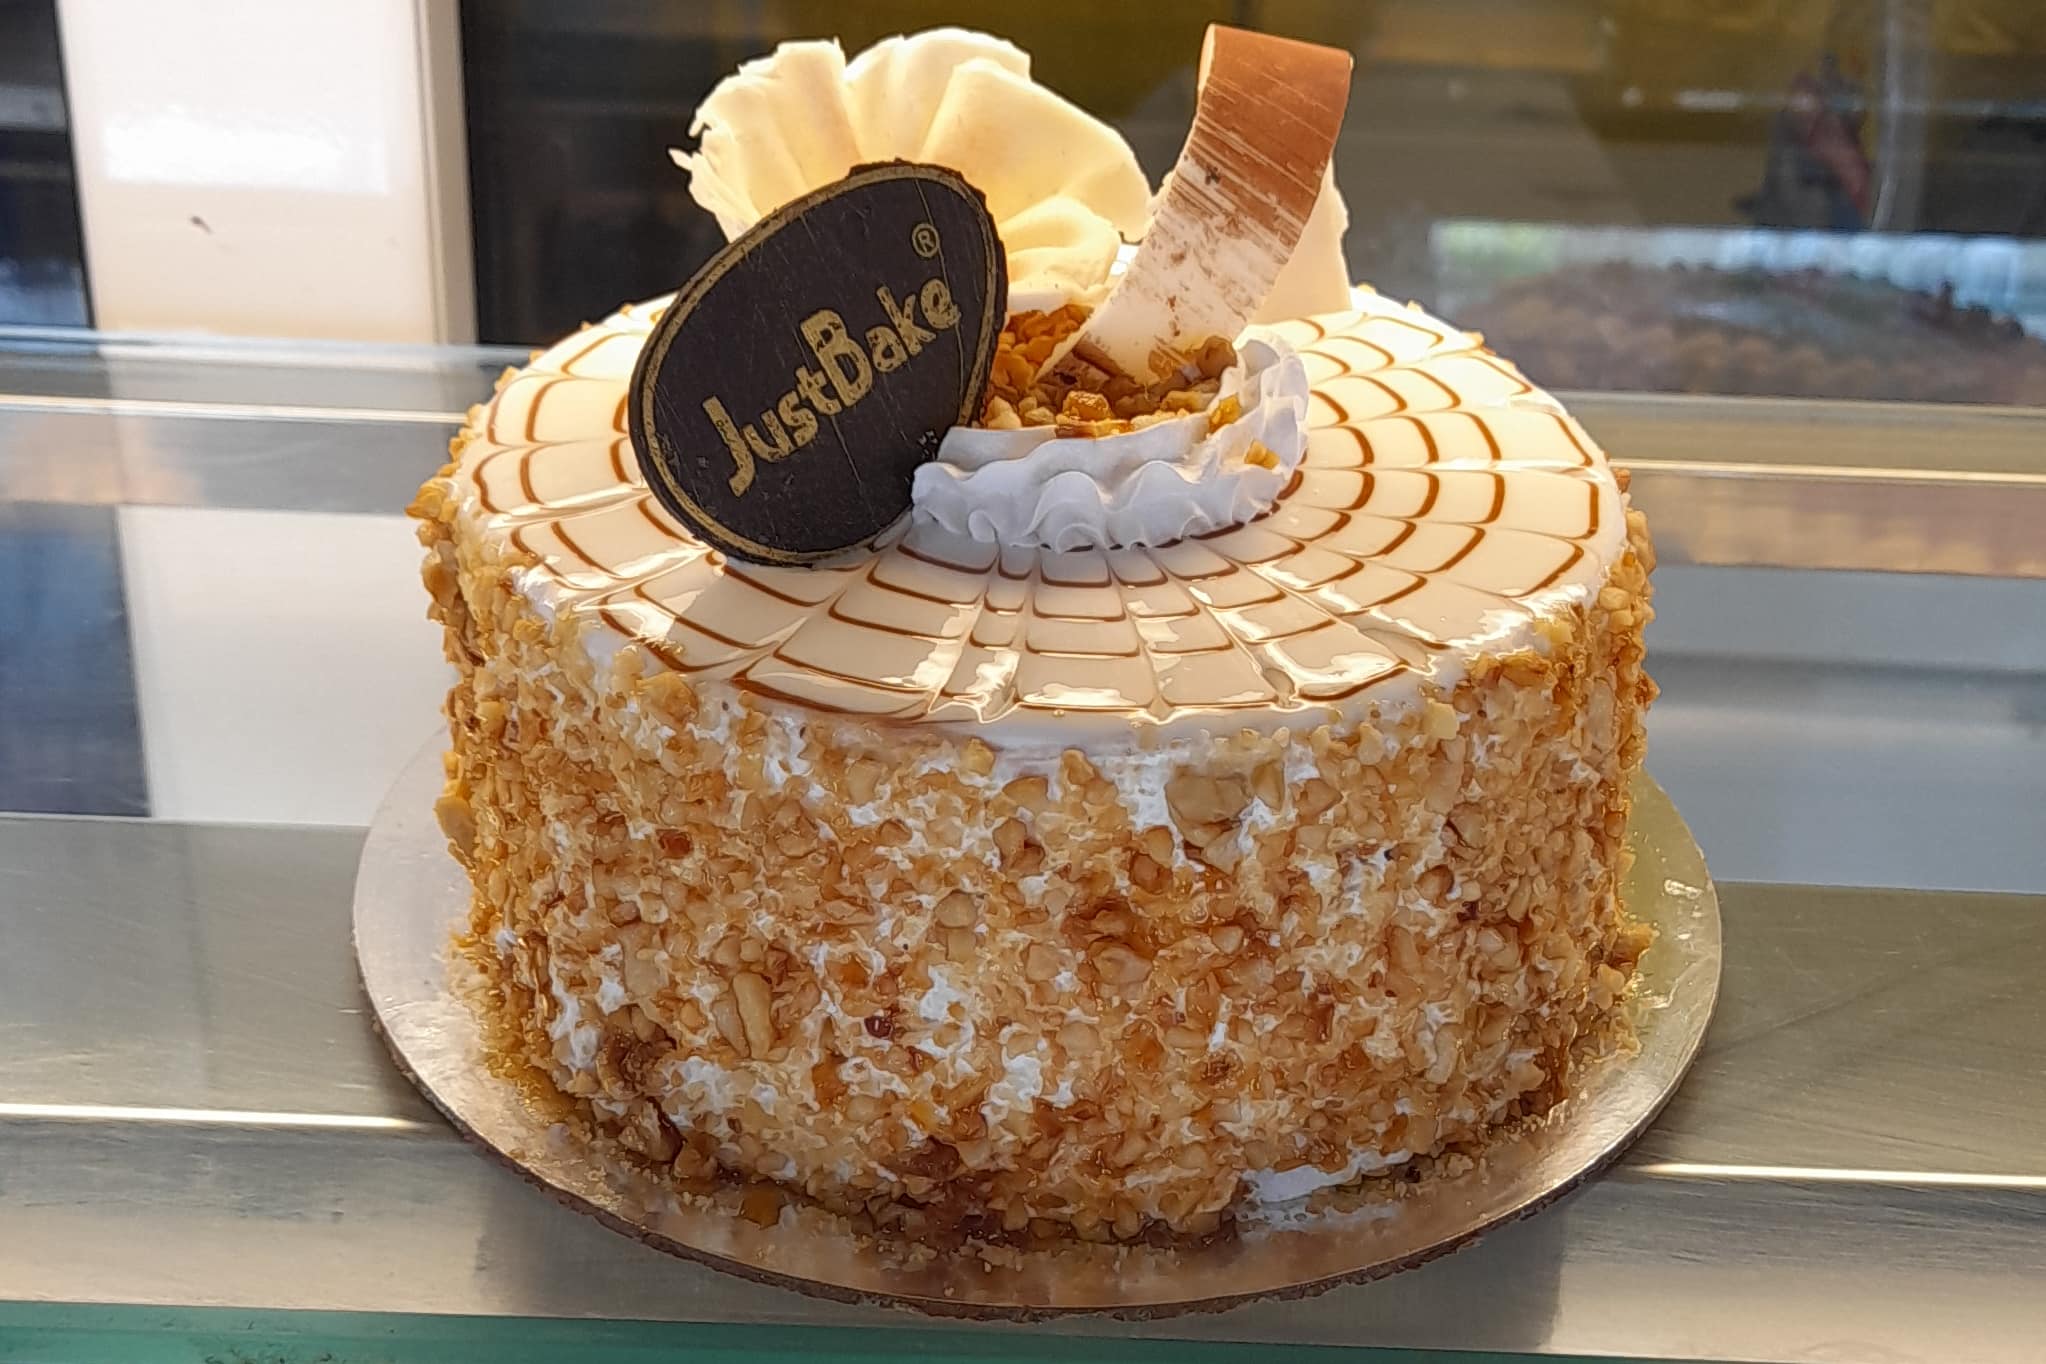 Share more than 79 butterscotch cake pic best - in.daotaonec